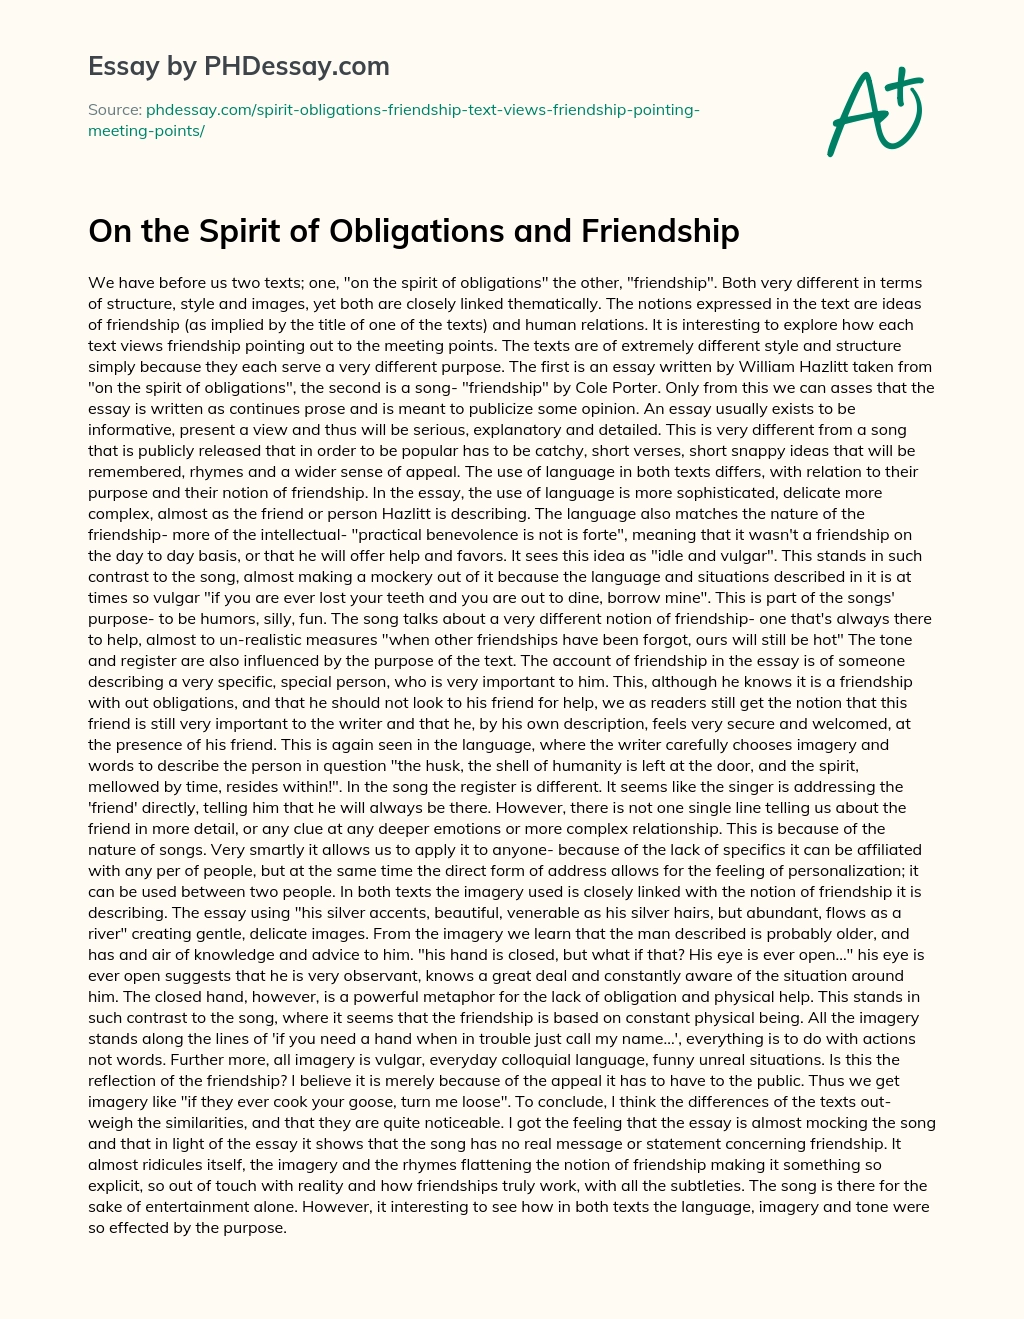 On the Spirit of Obligations and Friendship essay